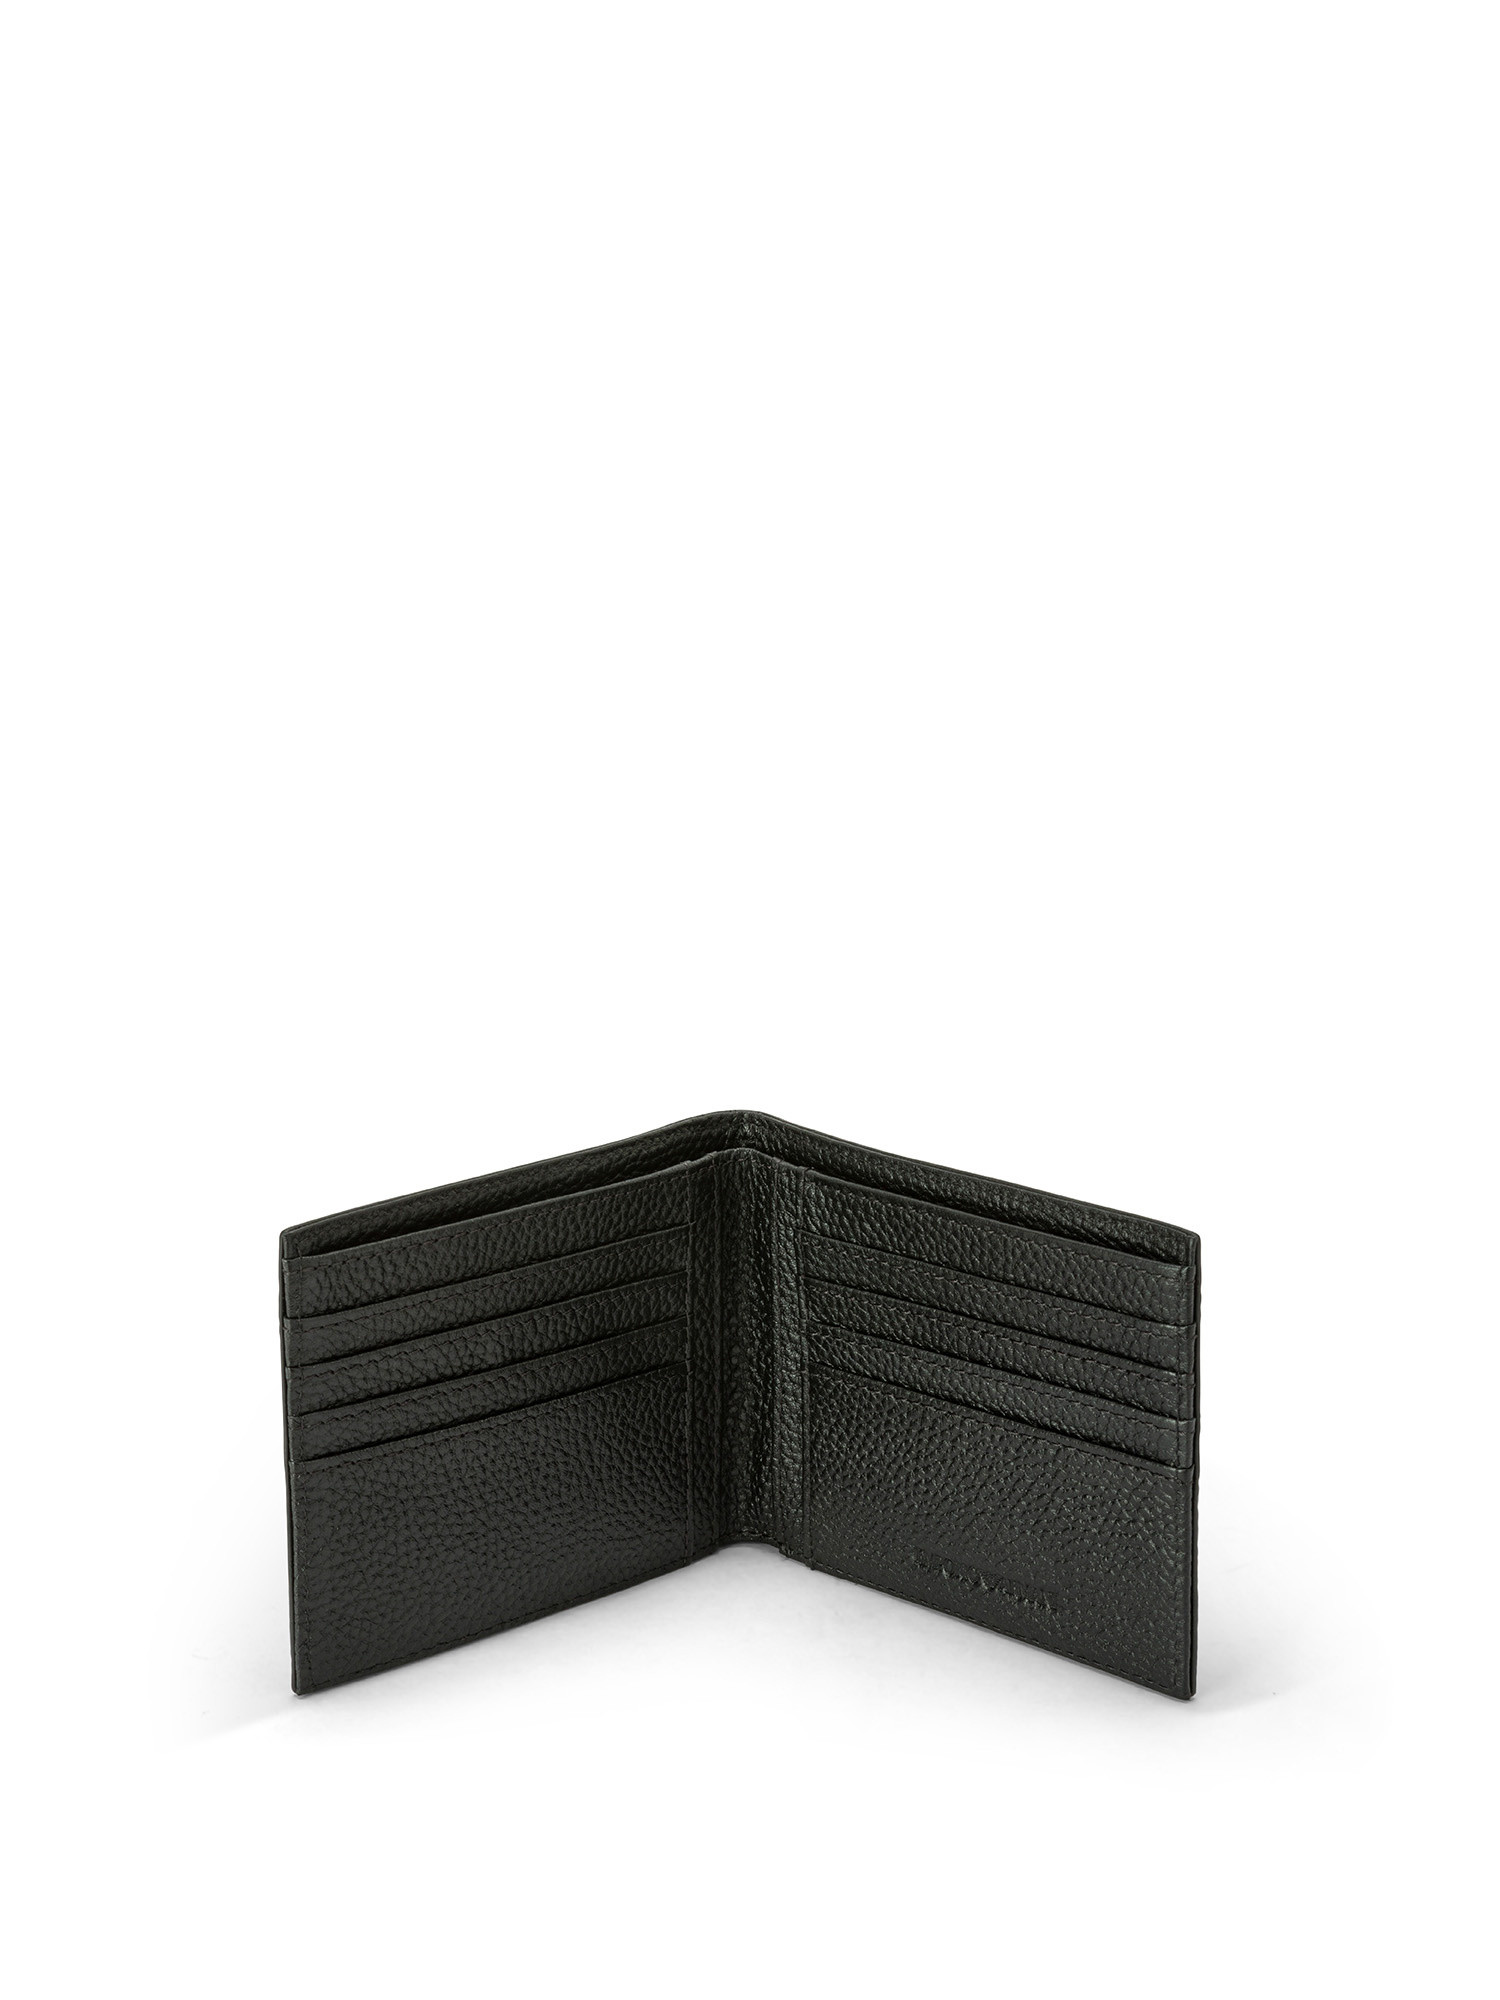 Emporio Armani - Leather wallet with all-over eagle logo, Black, large image number 2